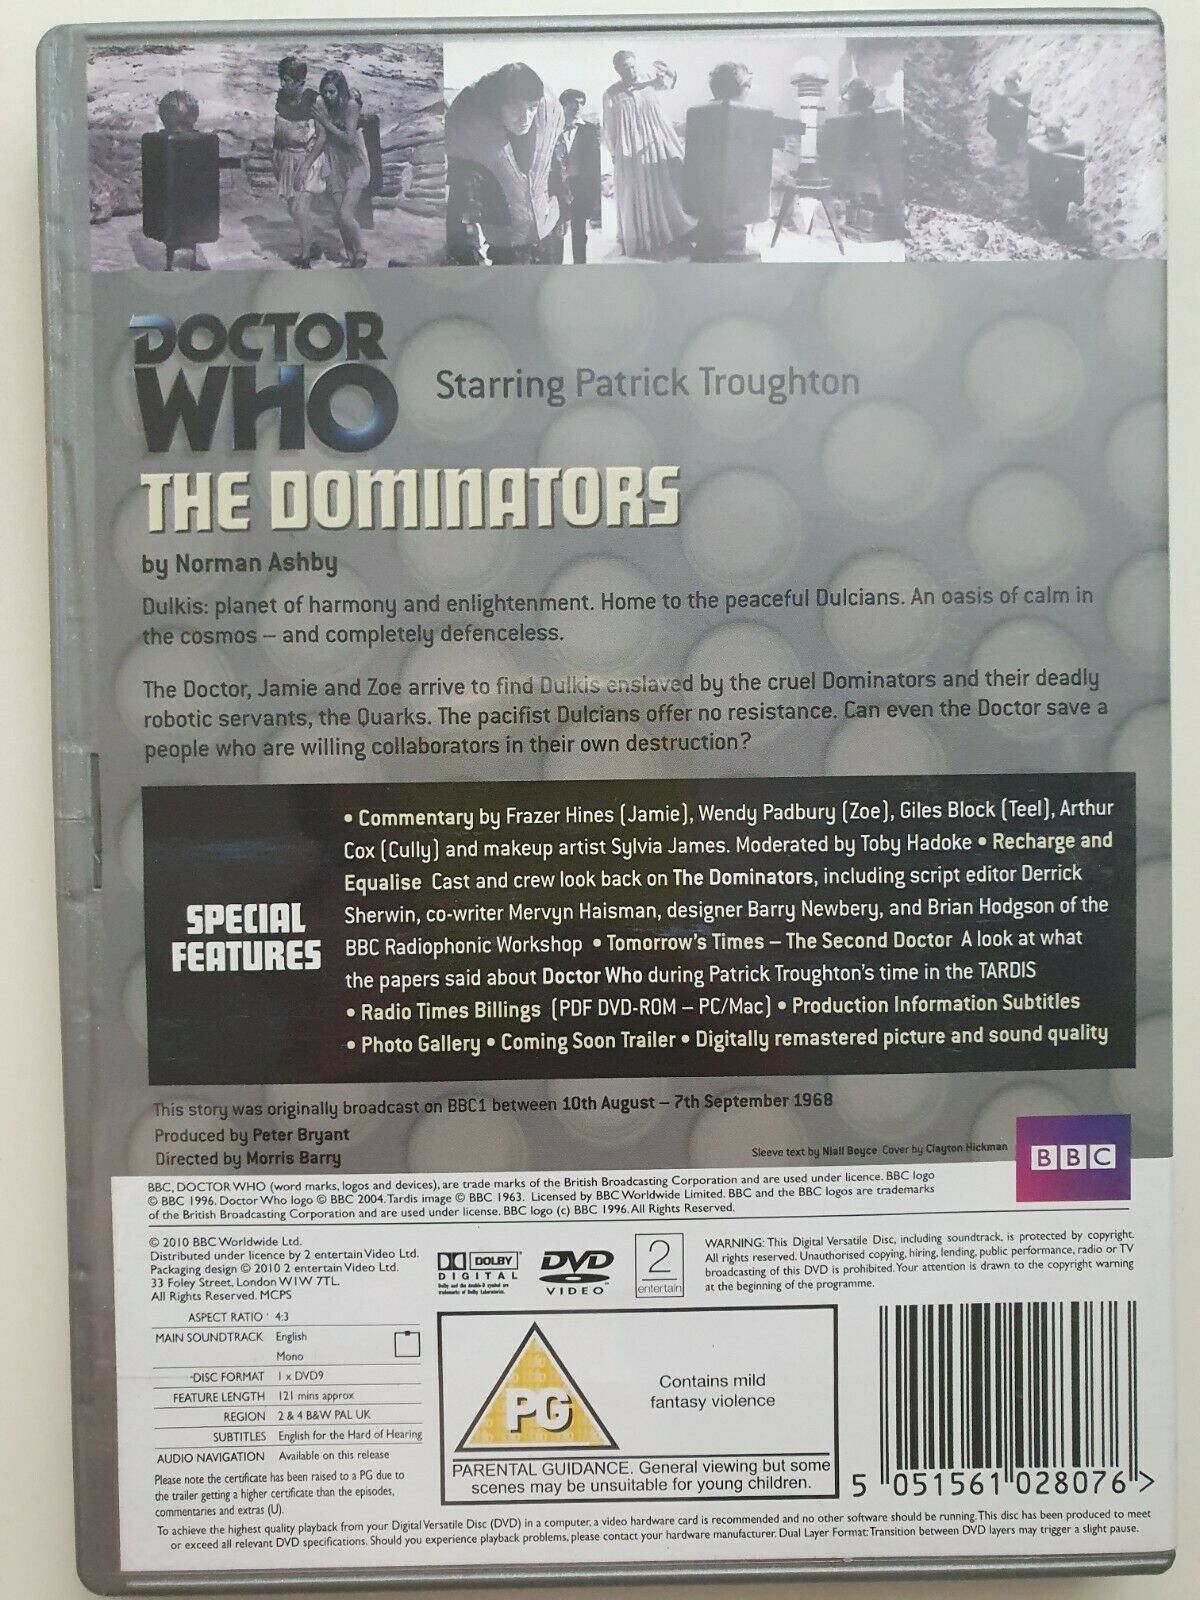 5051561028076 Doctor Who - The Dominators 1968 DVD 2010 VERY GOOD CONDITION DISCS ONCE USED